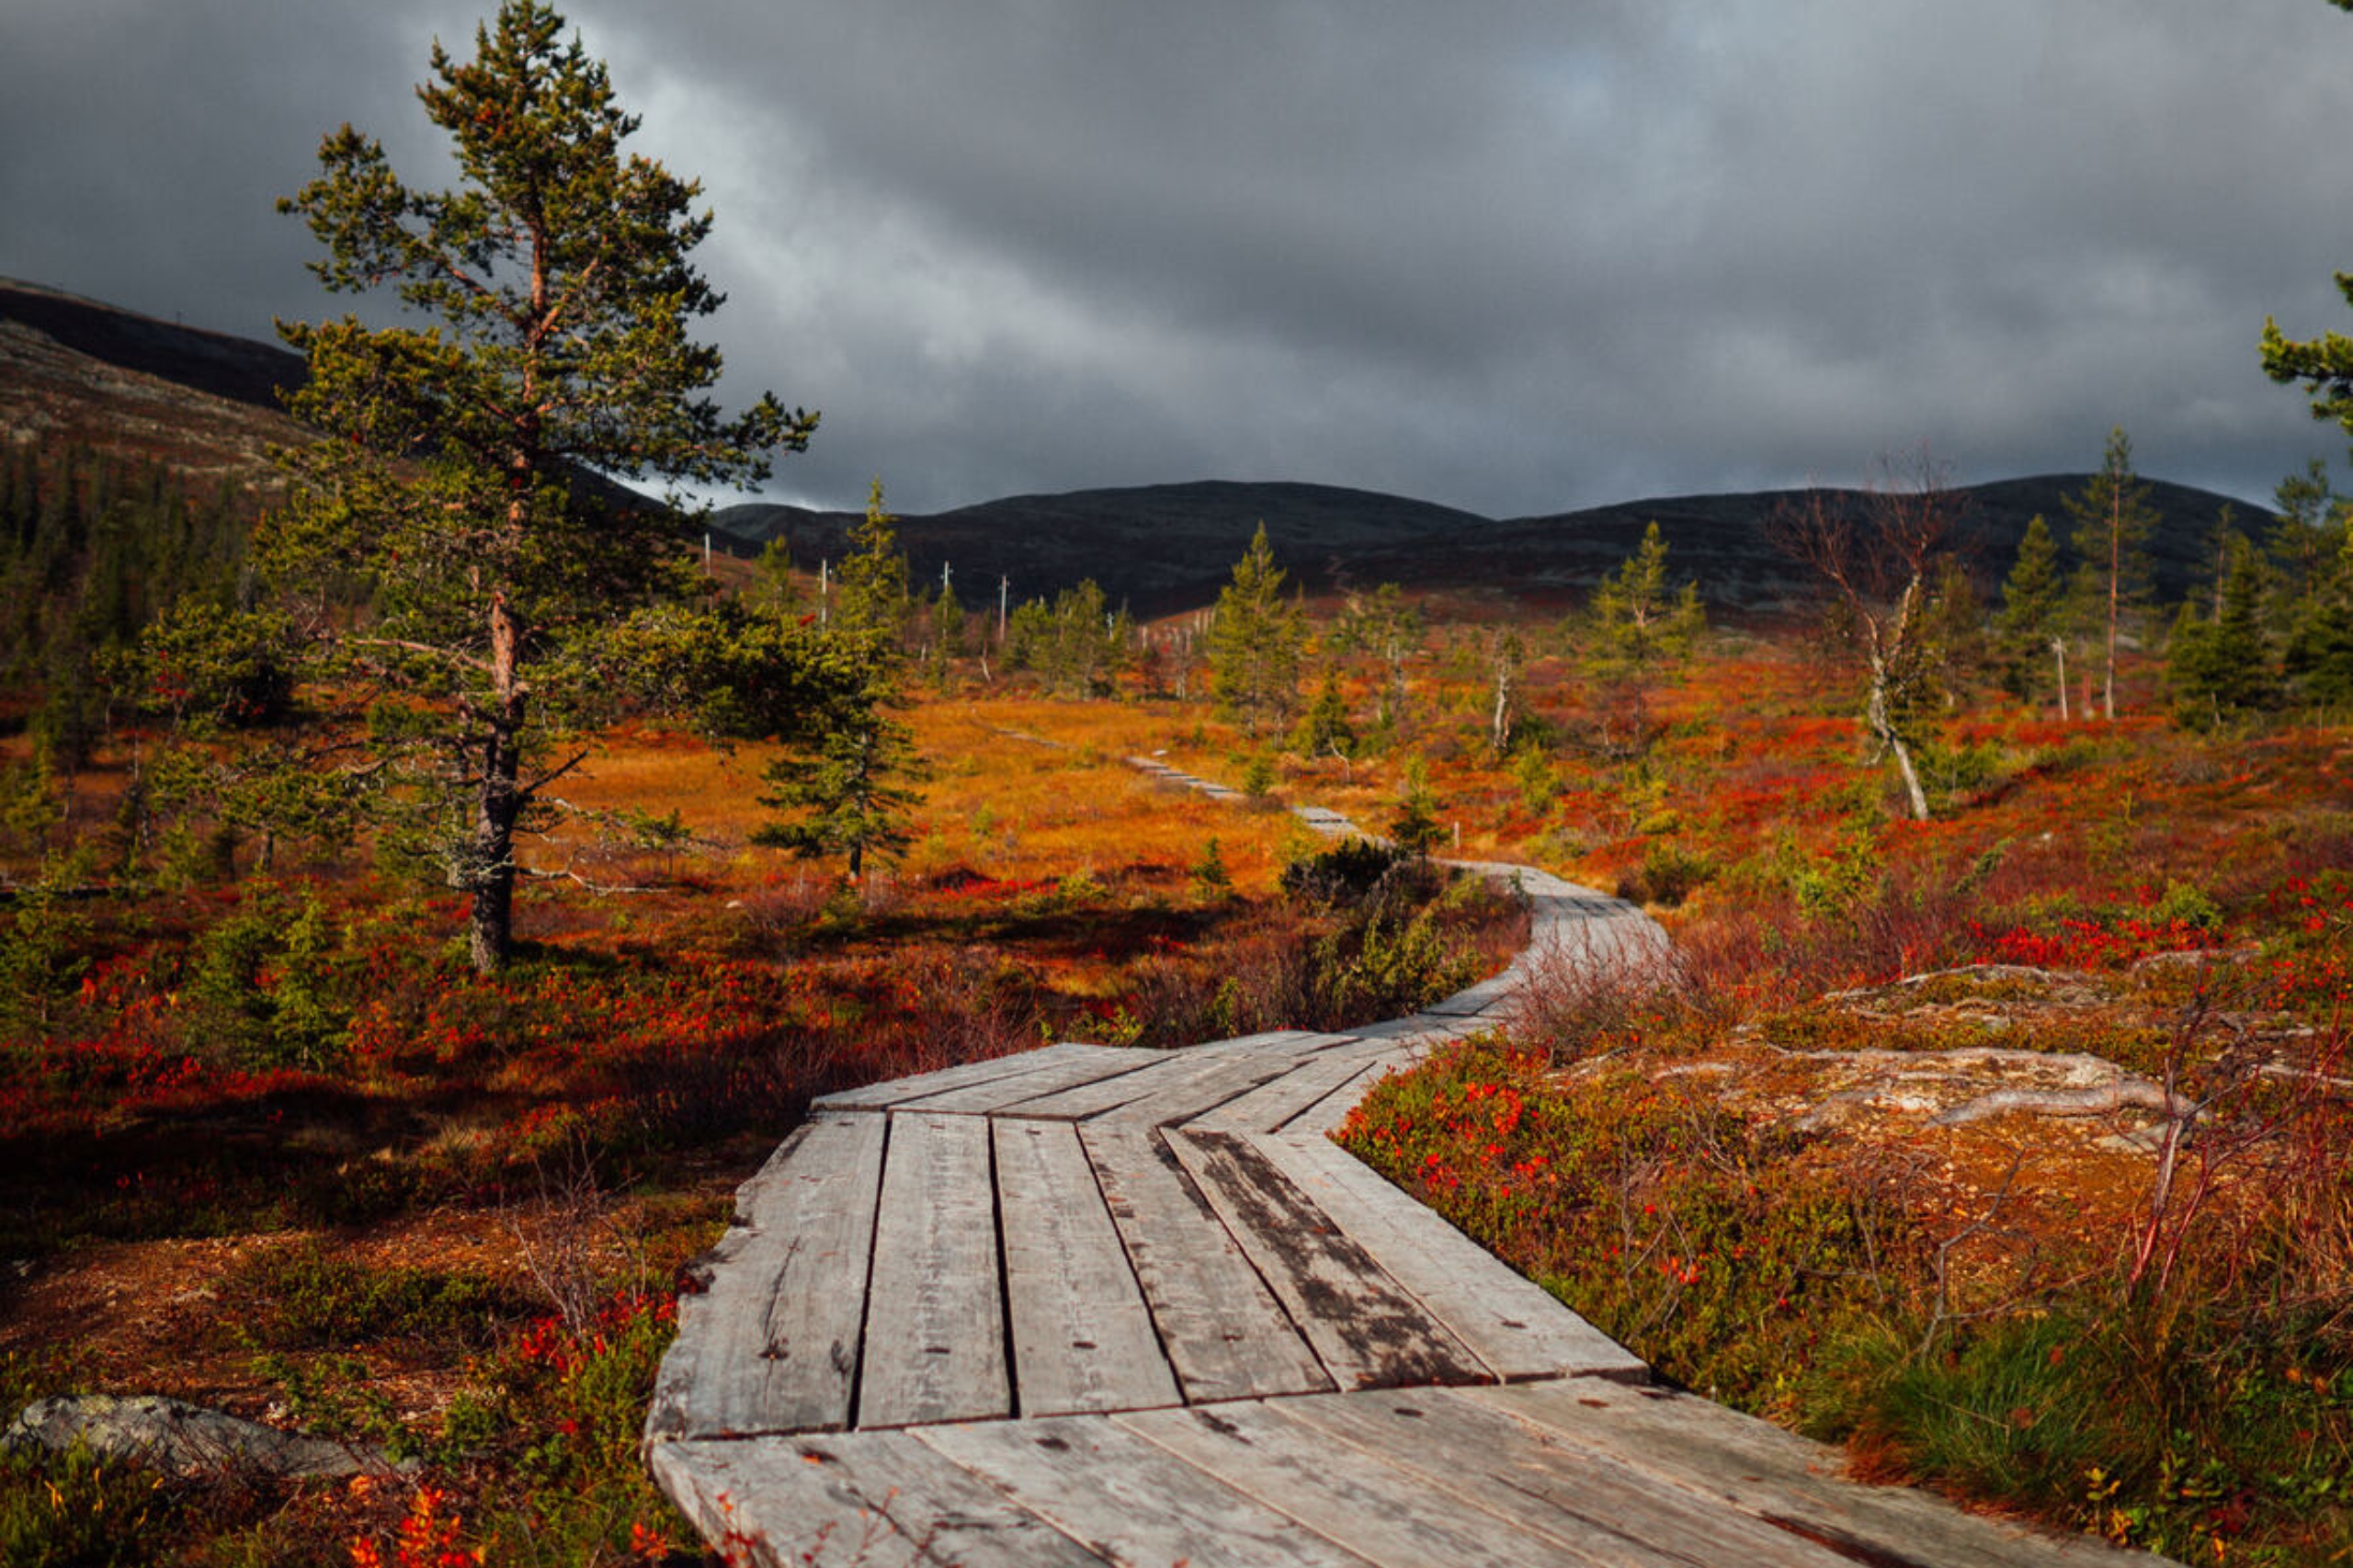 The best time to travel to Finland is from spring to autumn - each season has its own advantages.